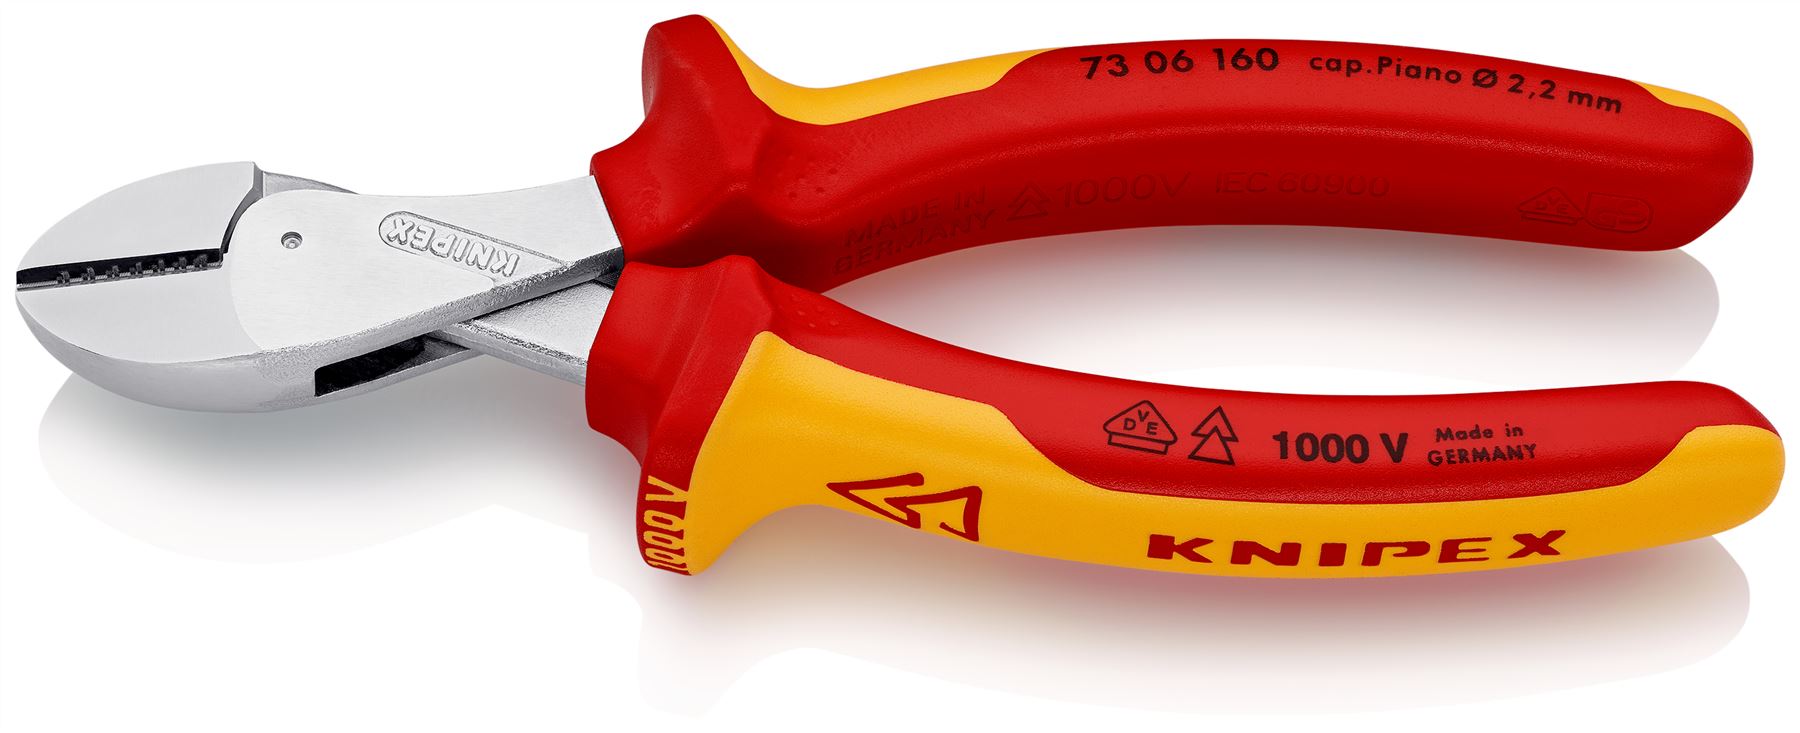 KNIPEX X-Cut Diagonal Cutting Pliers Side Cutters High Leverage 160mm VDE Multi Component Grips 73 06 160 SB